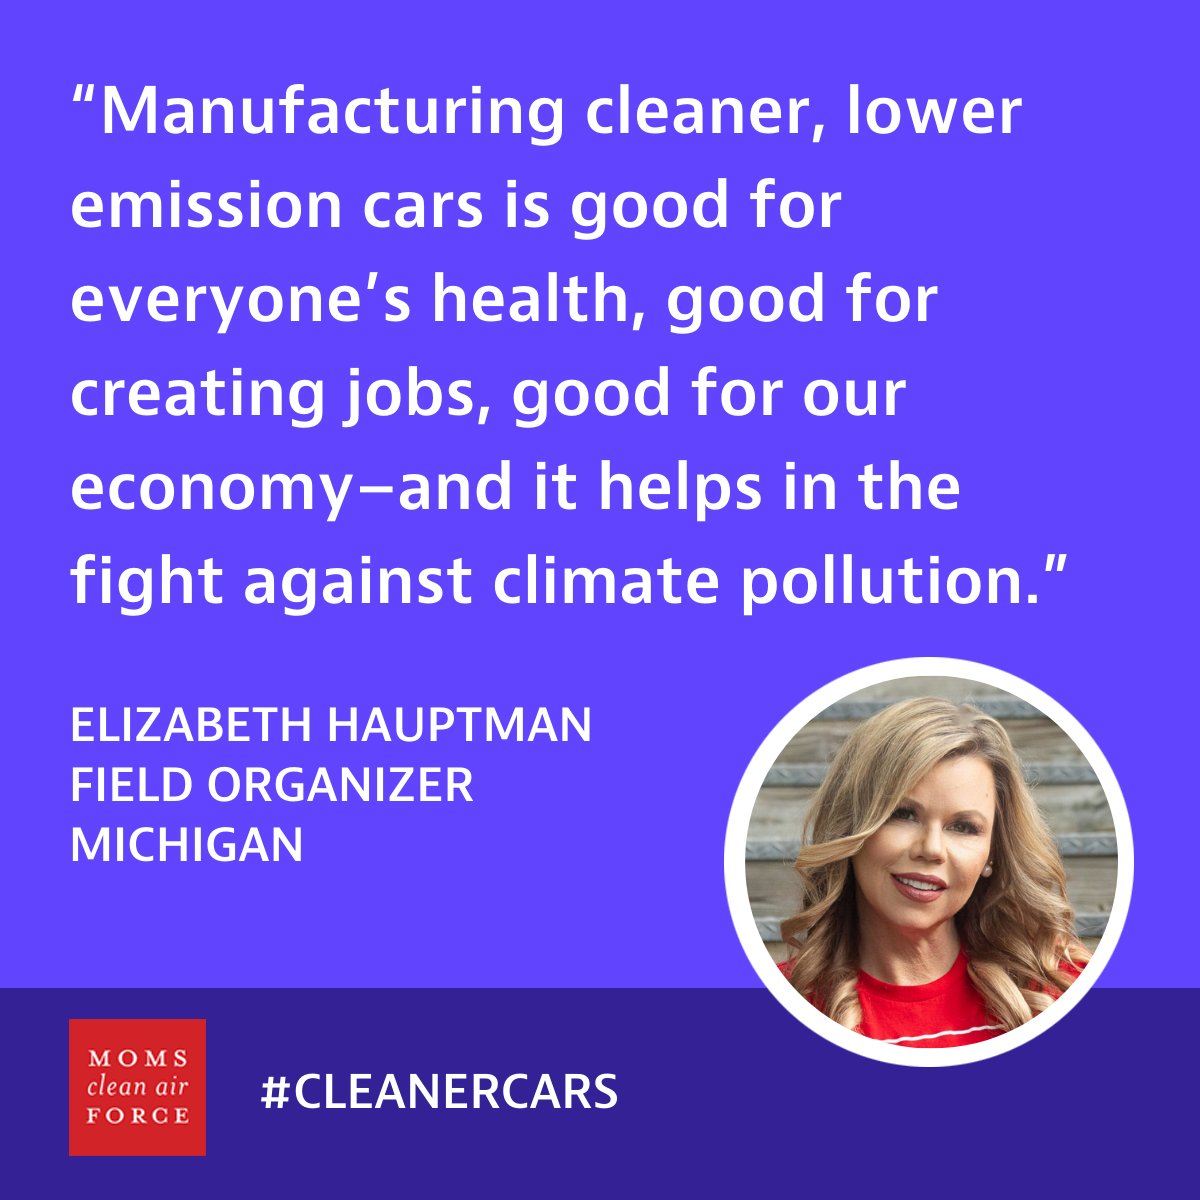 My son lives with asthma, and as a mother, there's nothing more terrifying than watching my son struggle to breathe. @EPA's new #CleanerCars standards protect my child's health by significantly cutting tailpipe pollution–a known asthma attack trigger. Thank you, EPA &